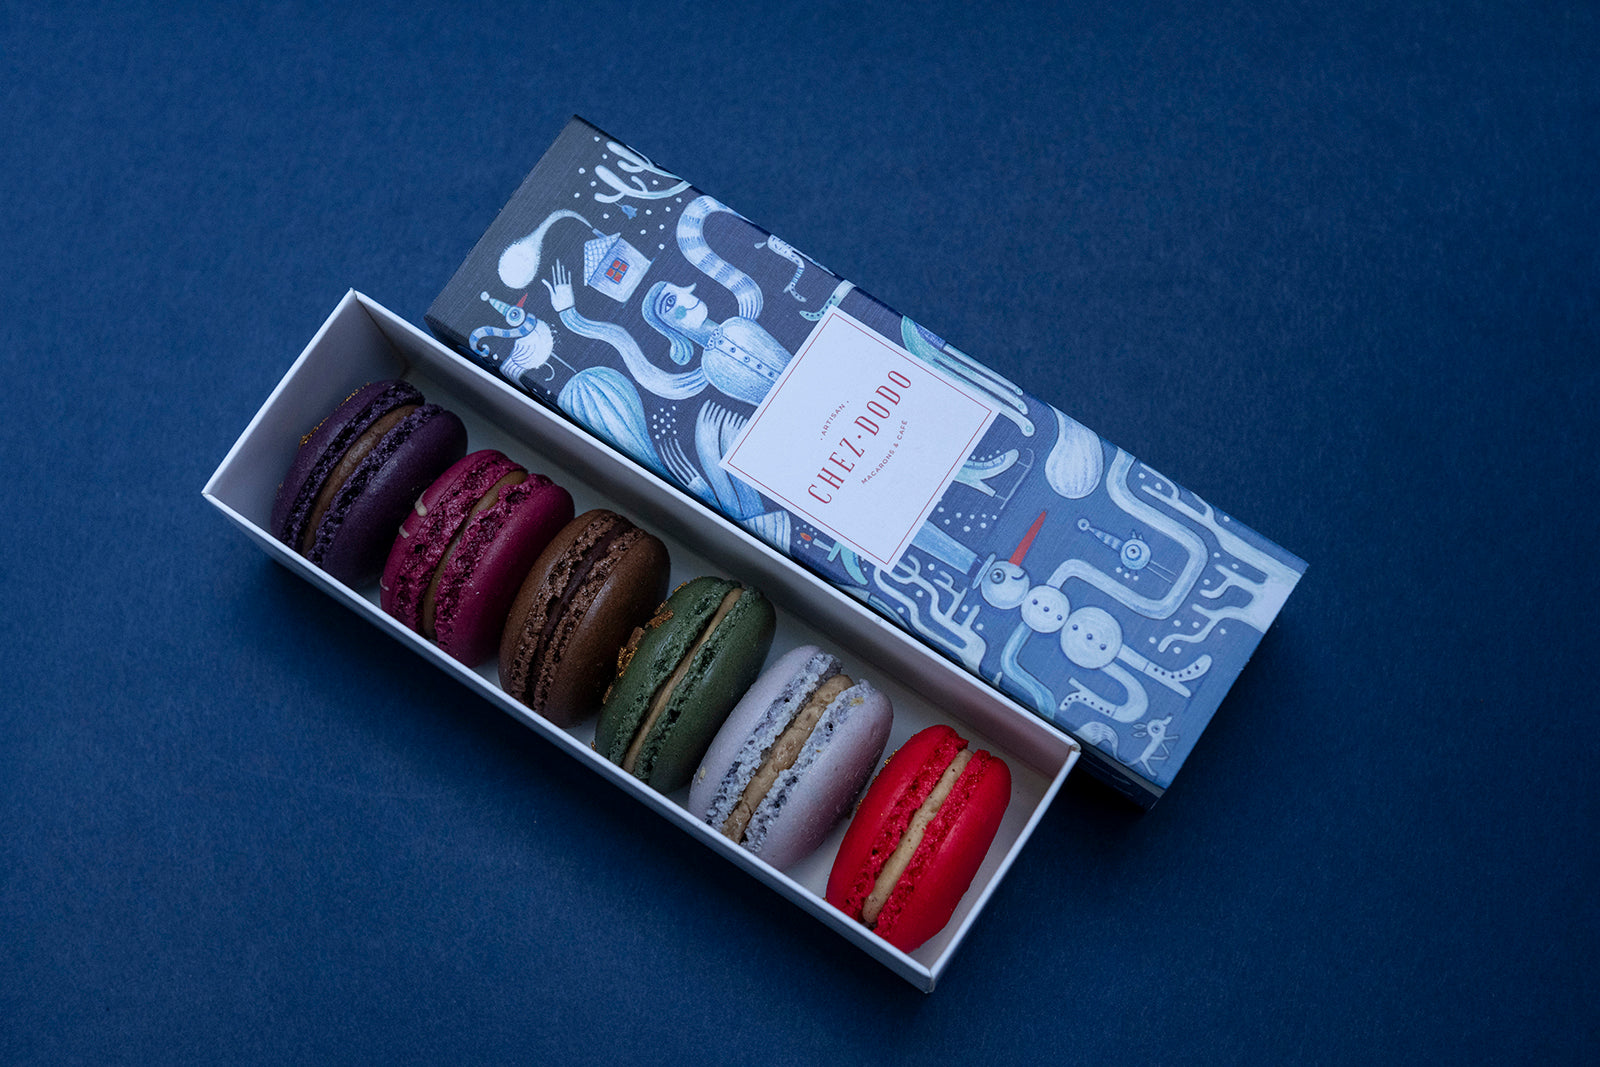 6-piece macaron selection in our holiday gift box